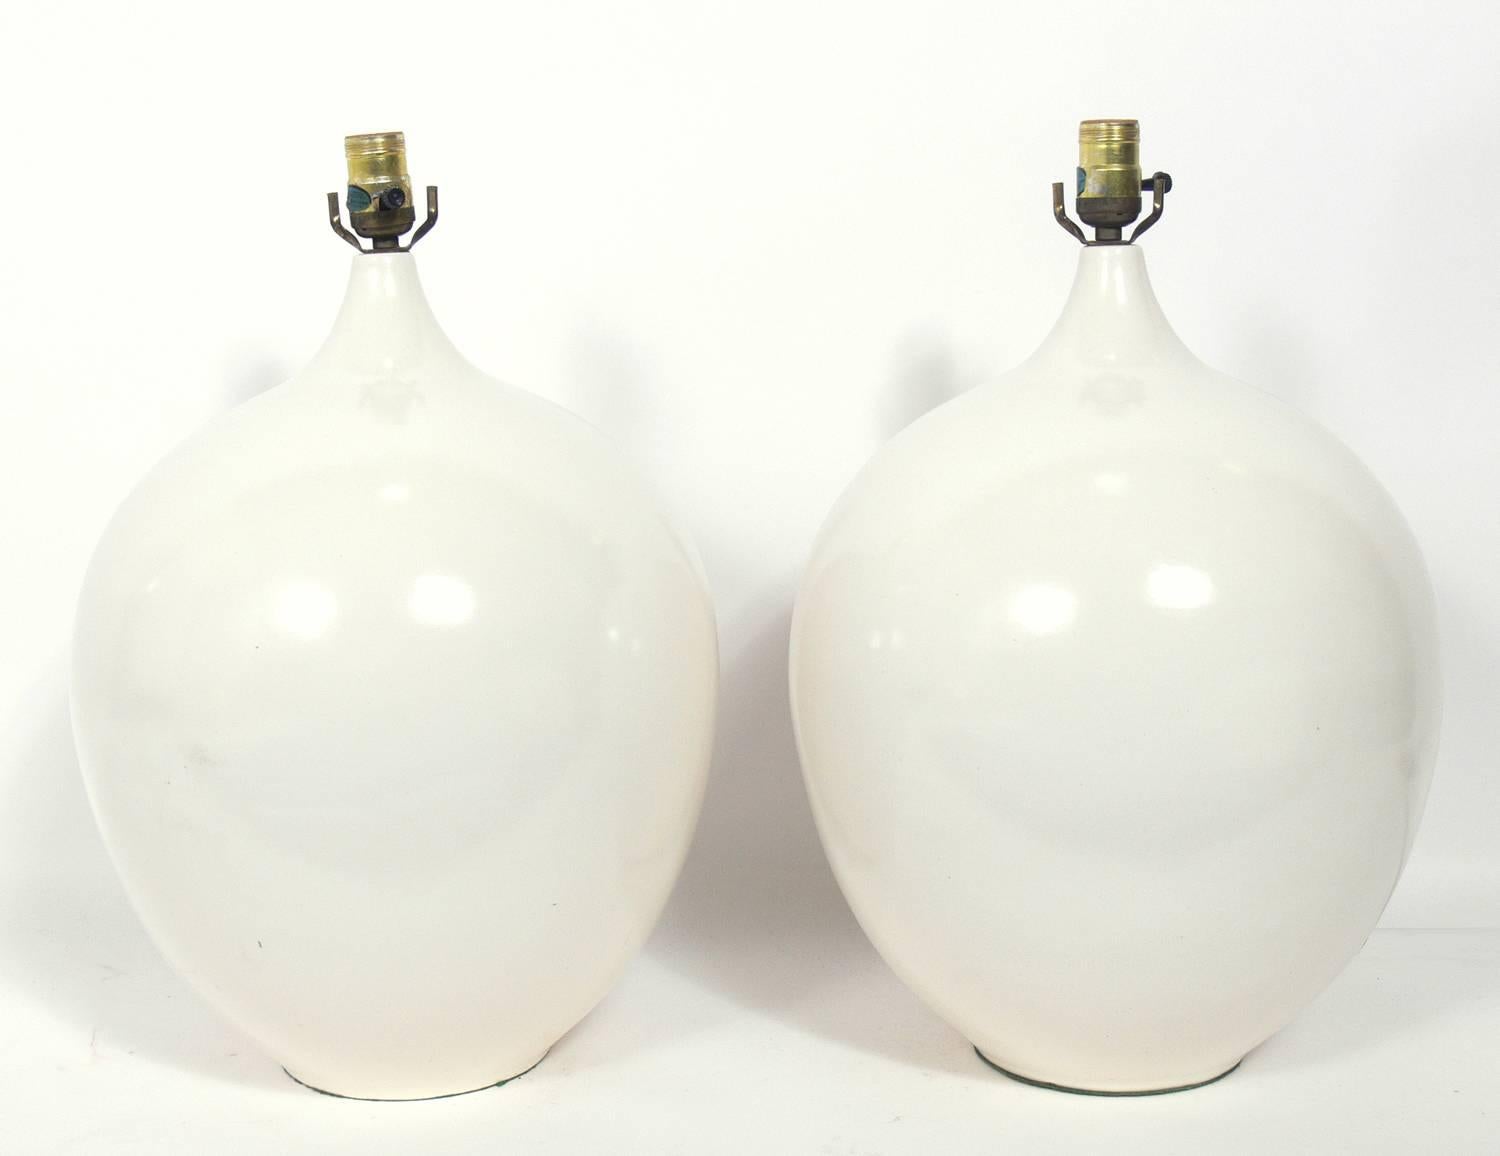 Pair of sculptural white ceramic lamps, American, circa 1960s. Rewired and ready to use. The price noted includes the shades.